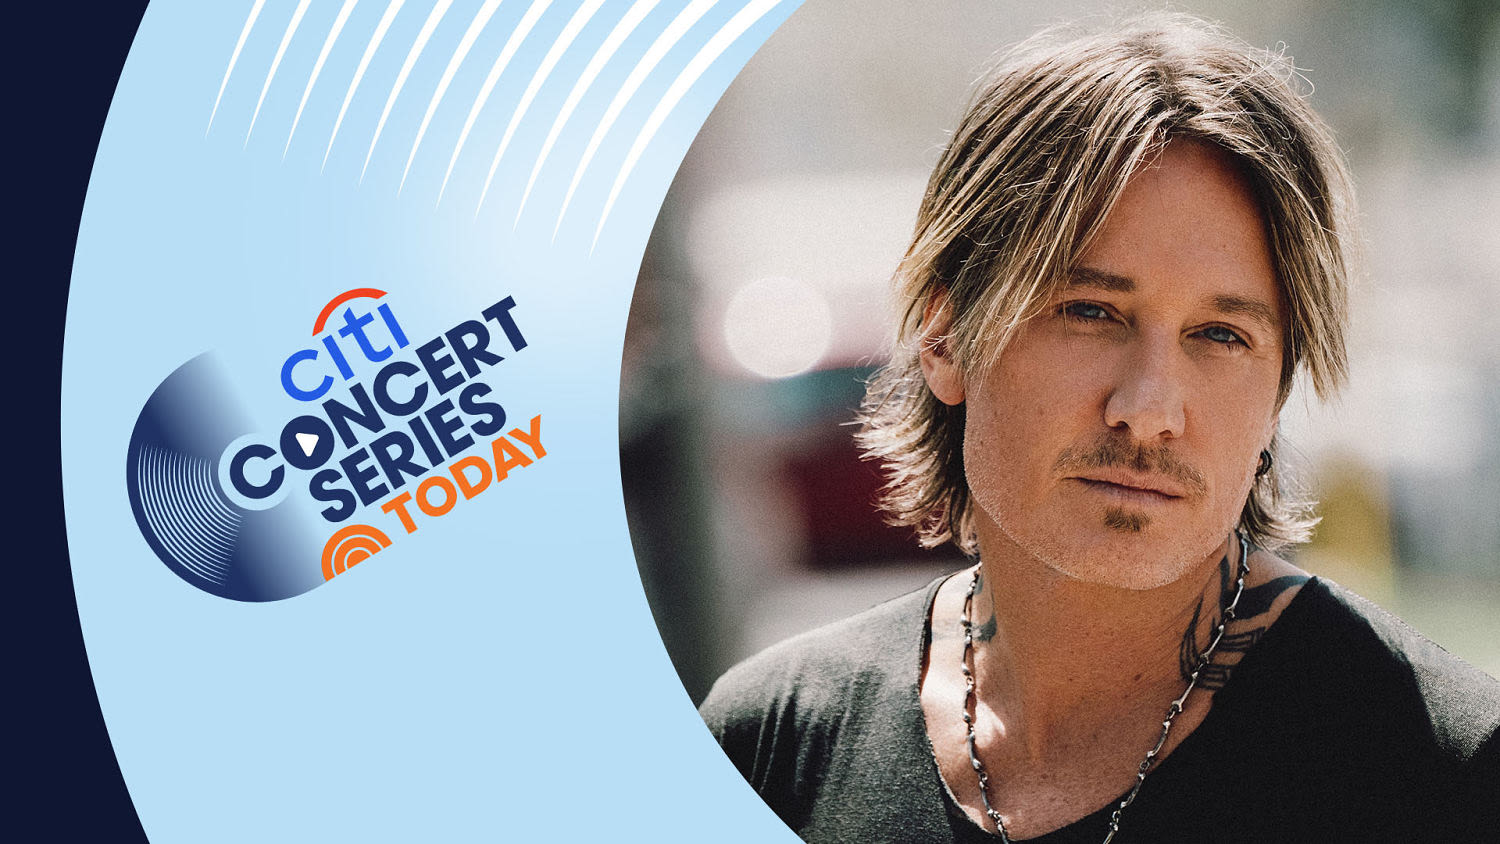 Keith Urban concert on TODAY: What you need to know